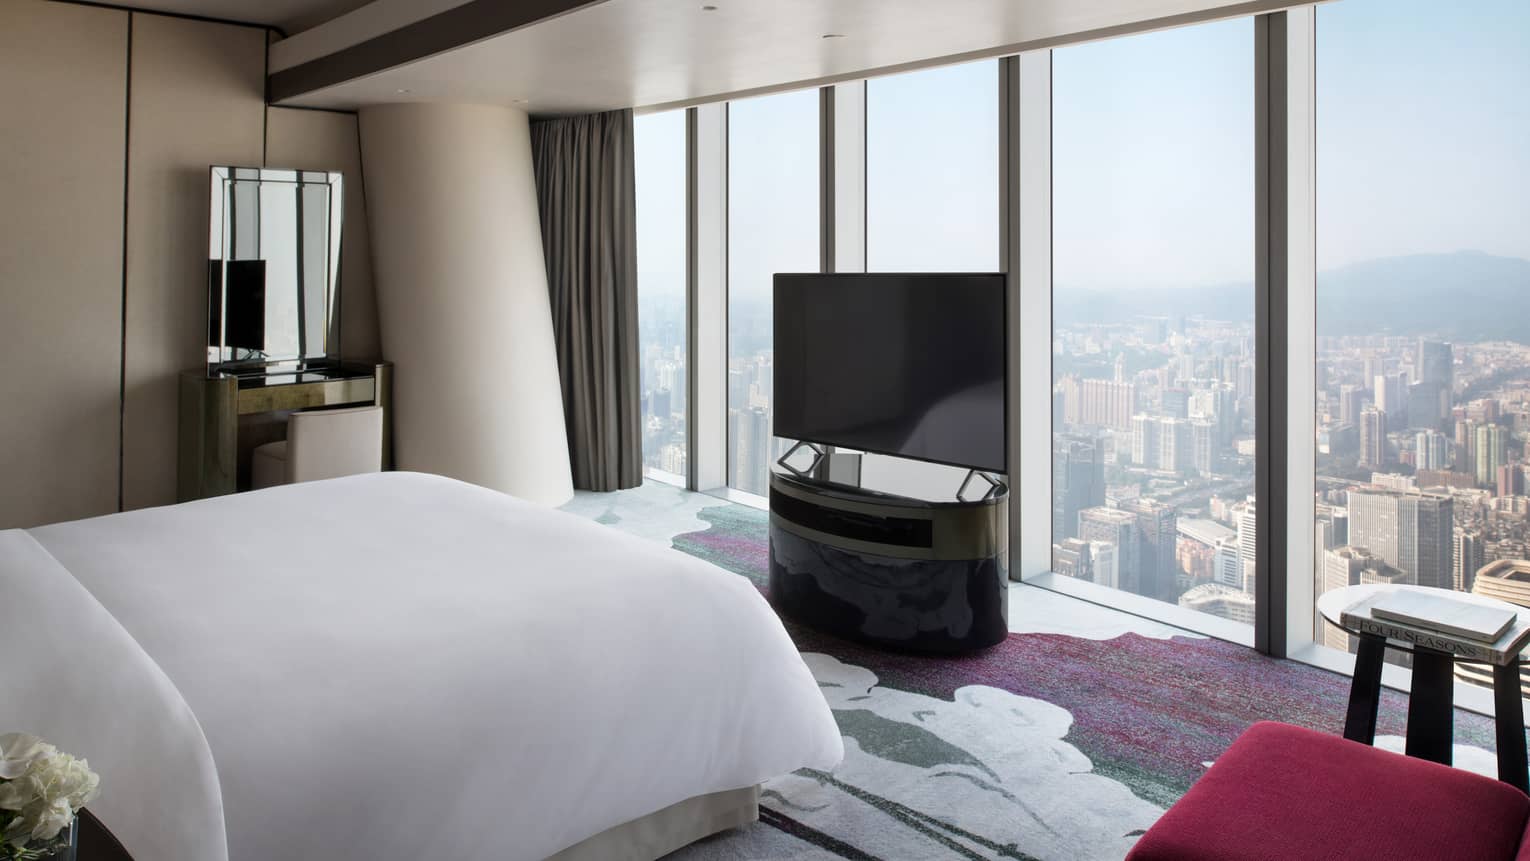 Deluxe King Suite City View Room with red accents and floor-to-ceiling windows